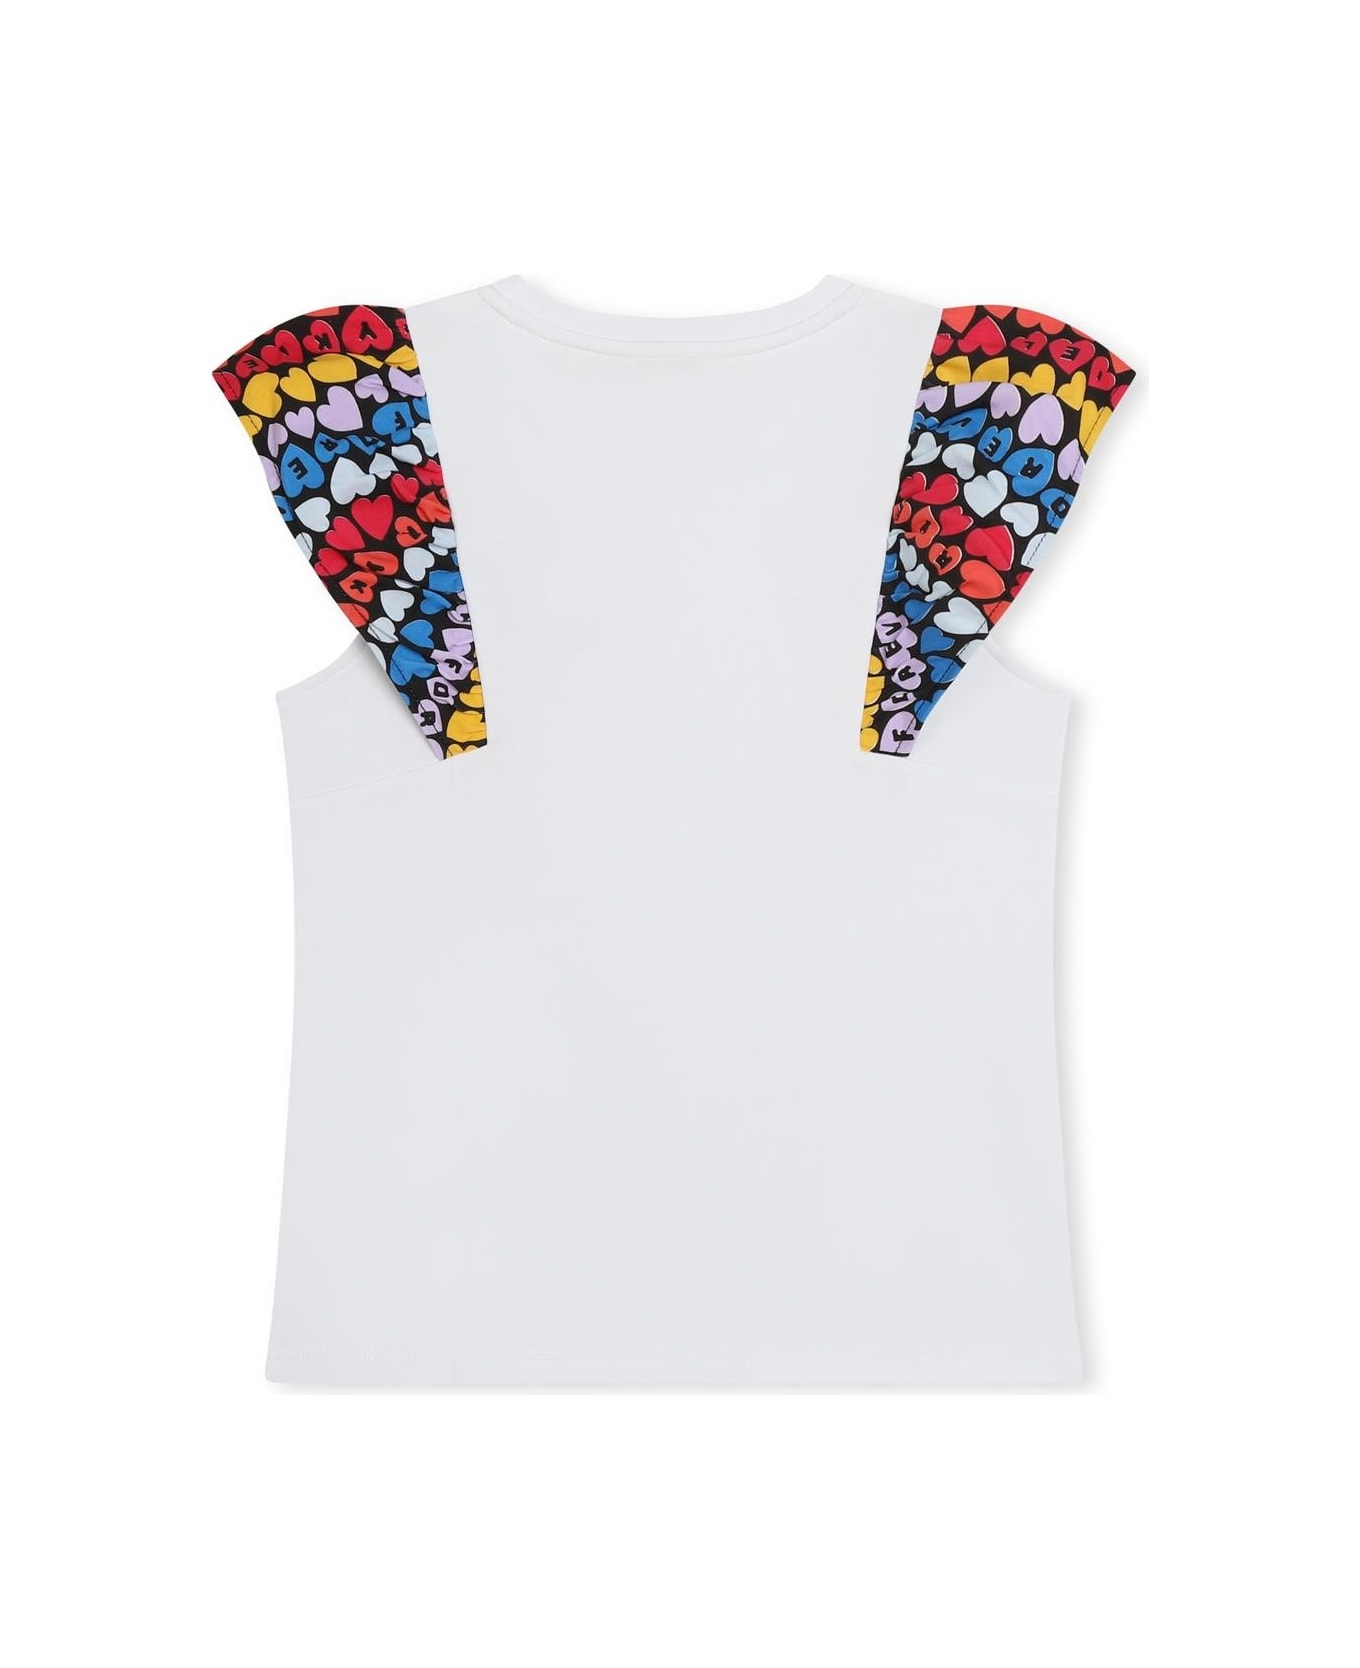 Sonia Rykiel T-shirt With Color-block Design - White